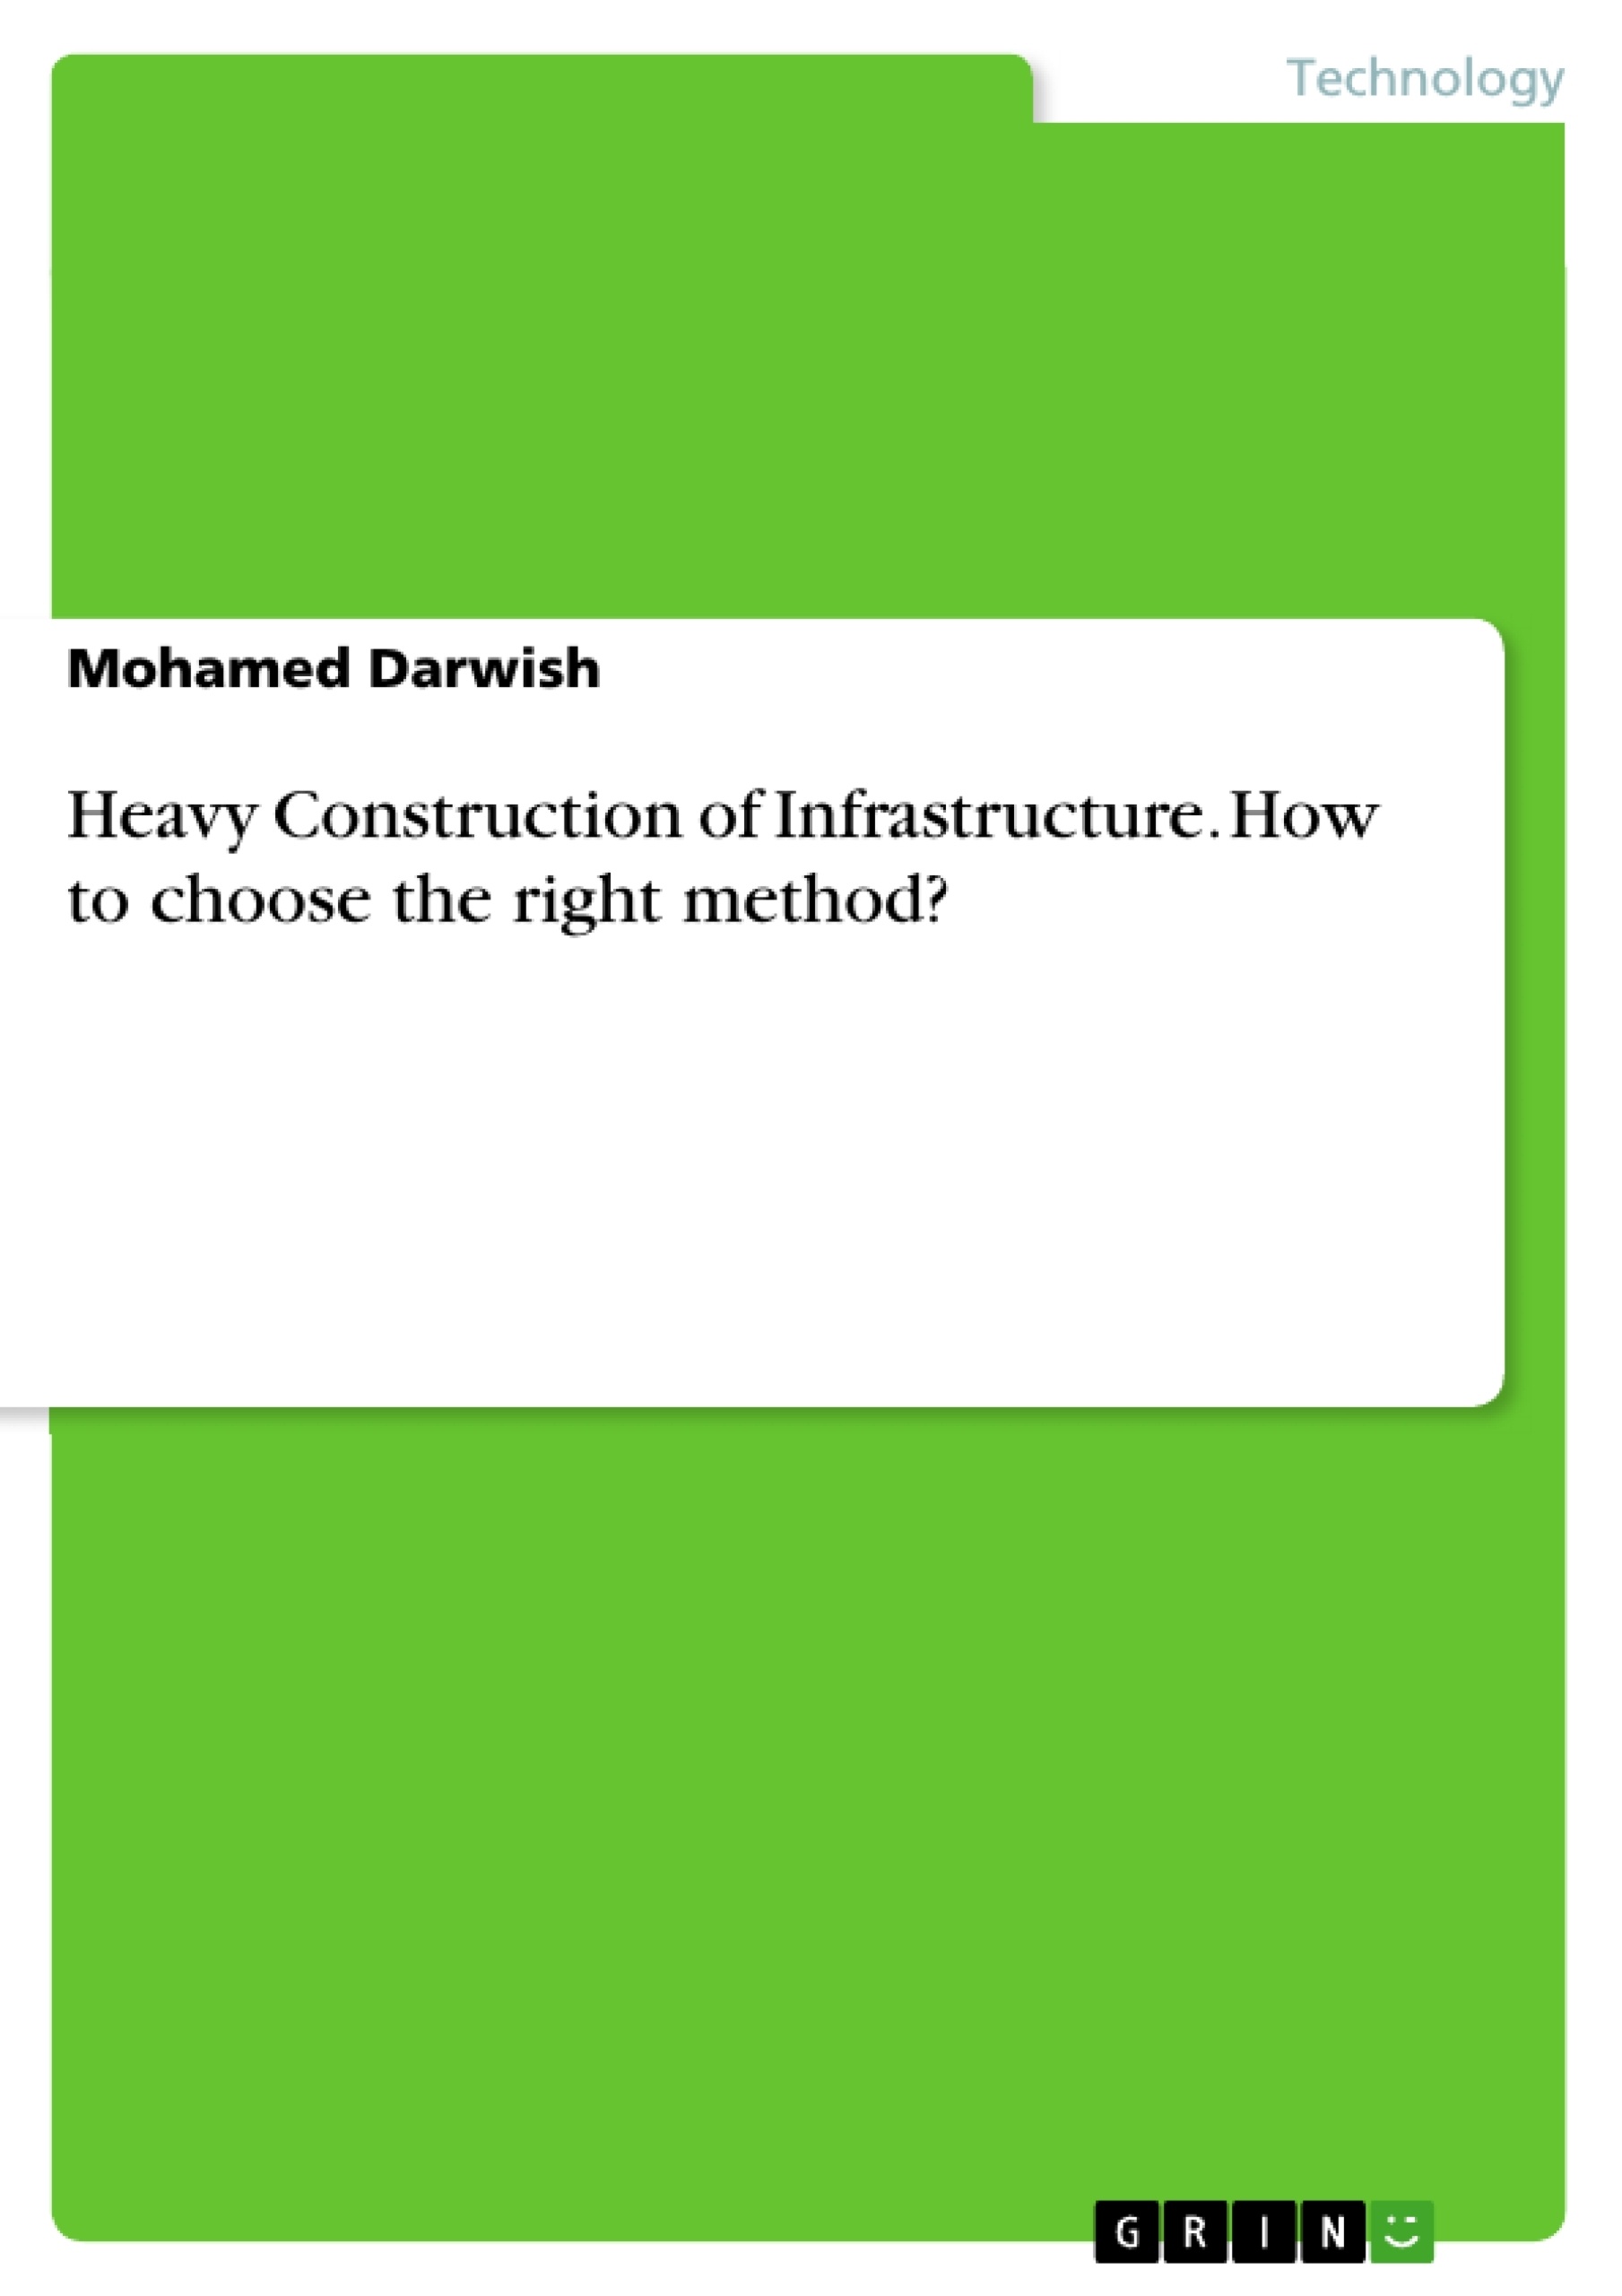 Title: Heavy Construction of Infrastructure. How to choose the right method?